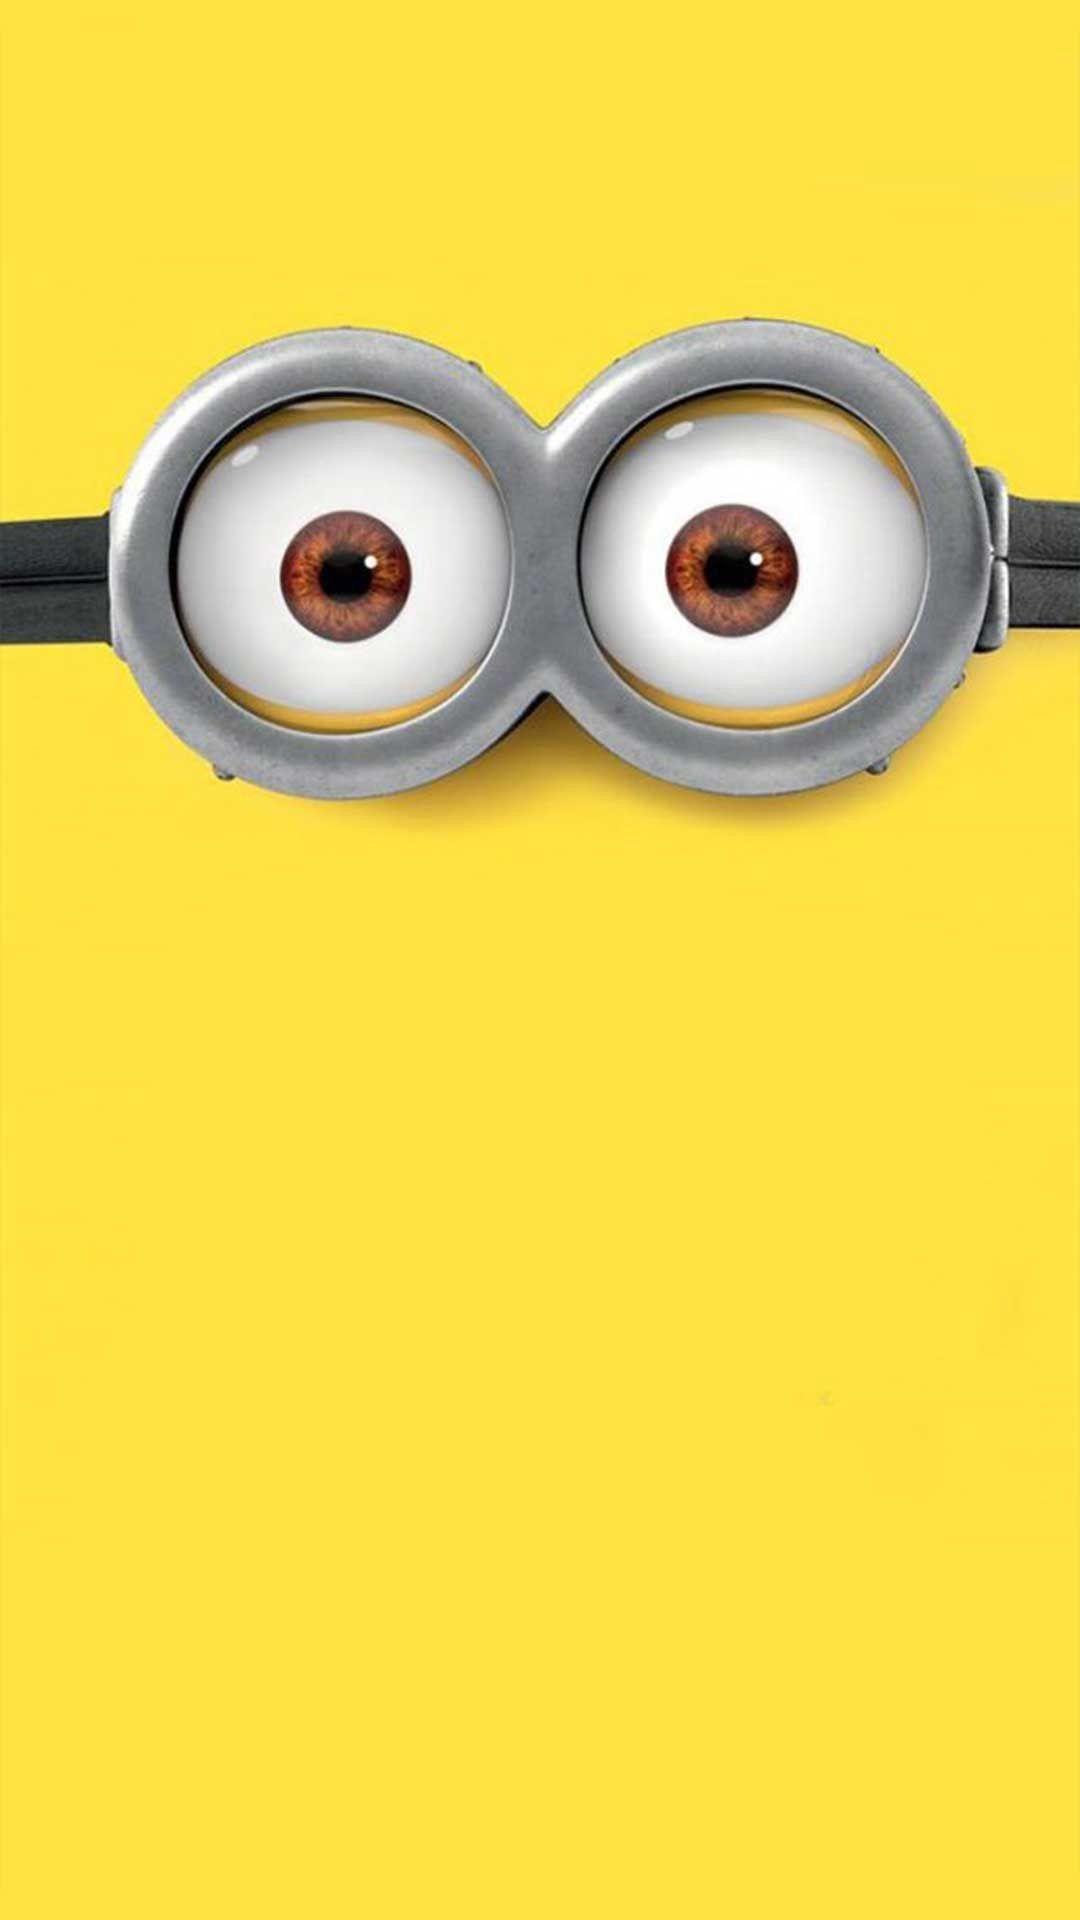 1080x1920 Minions 3D Iphone Wallpaper is high definition phone wallpaper. You can  make this wallpaper for your iPhone 5, 6, 7, 8, X backgrounds, Tablet, ...